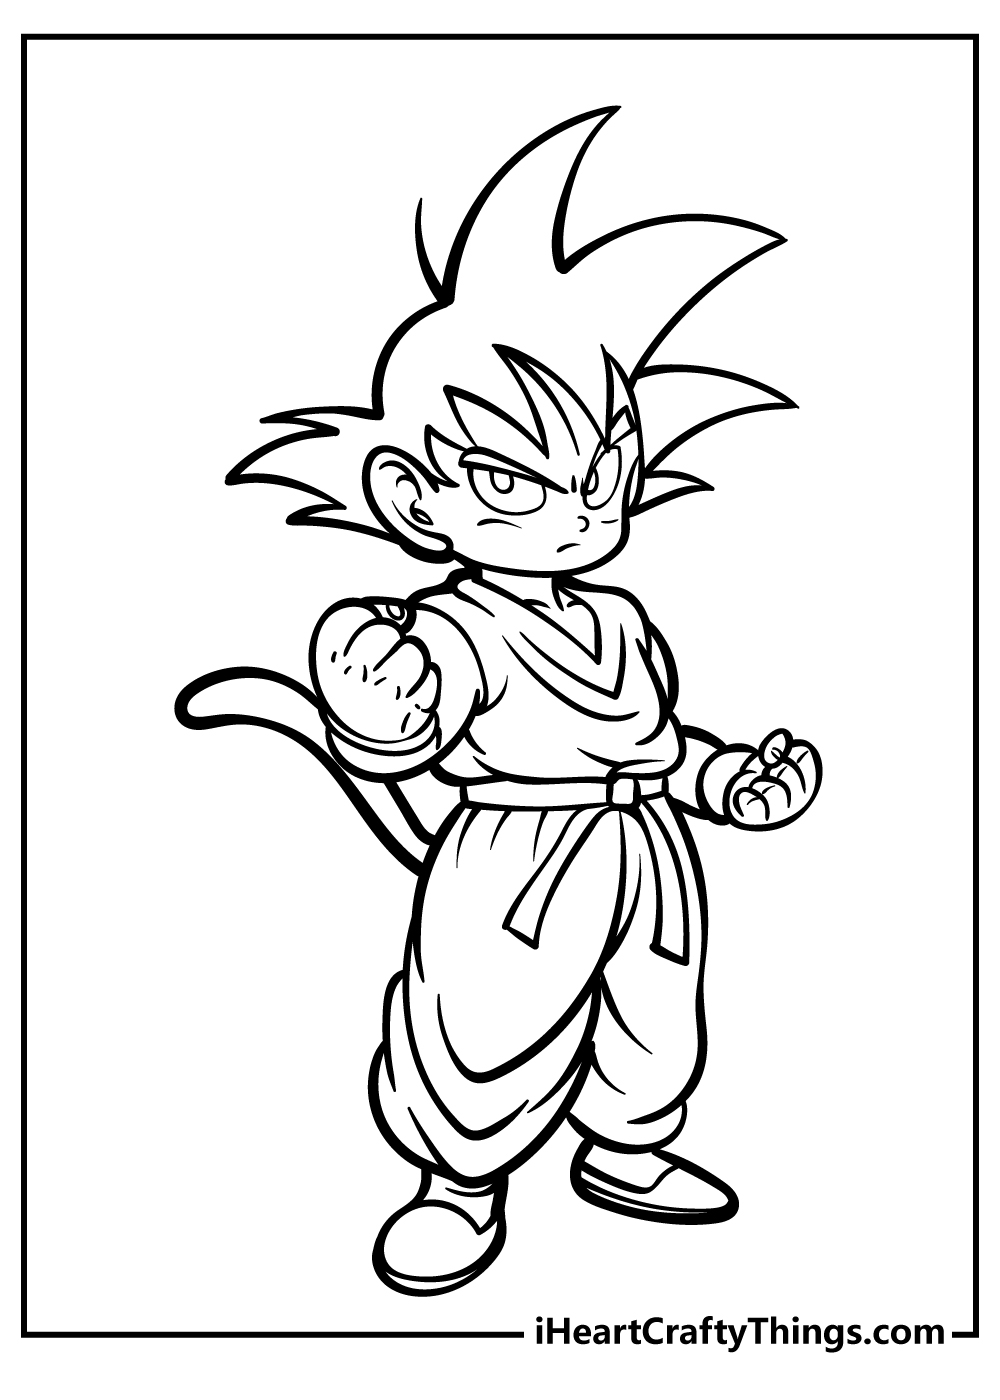 Dragon Ball Z Coloring Pages for adults free printable